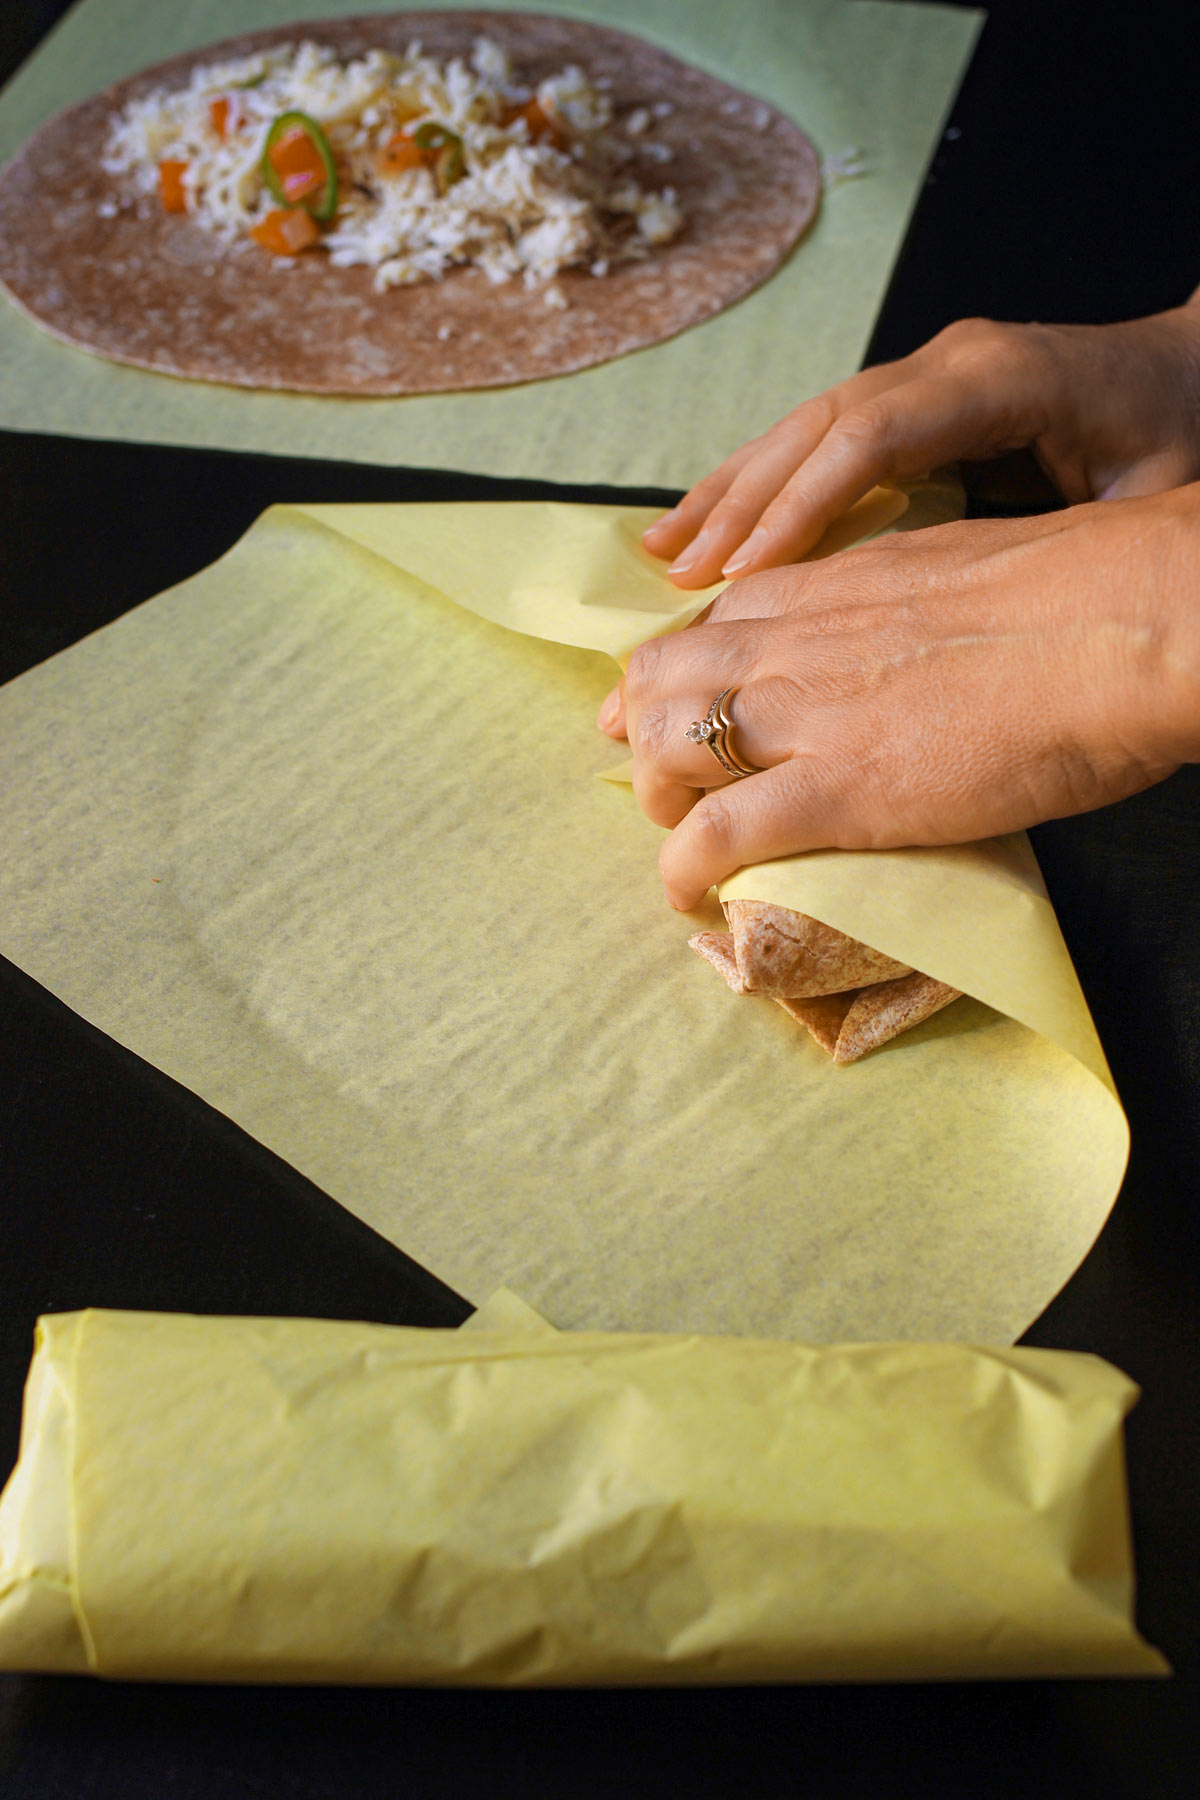 hands wrapping the rolled burrito in a deli wrap.